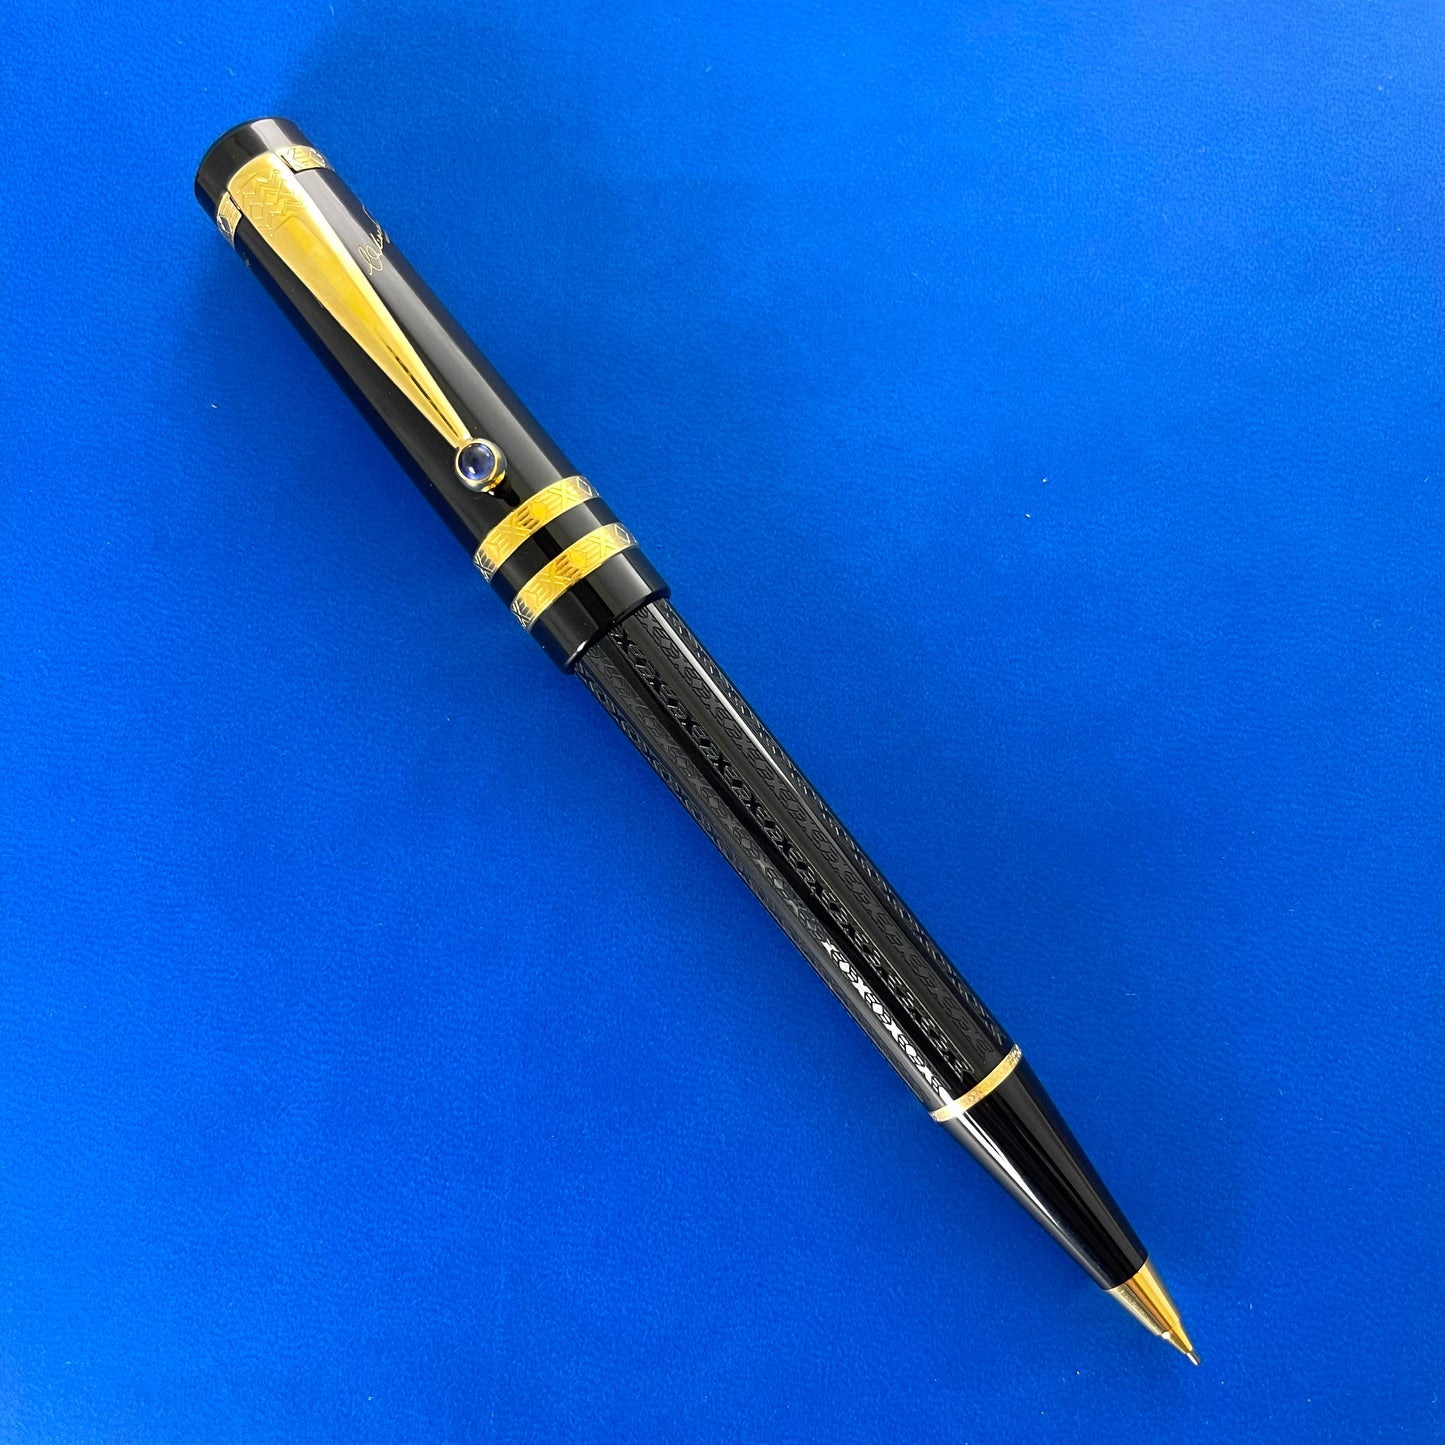 Pre-Owned MontBlanc Dostoevsky Mechanical Pencil